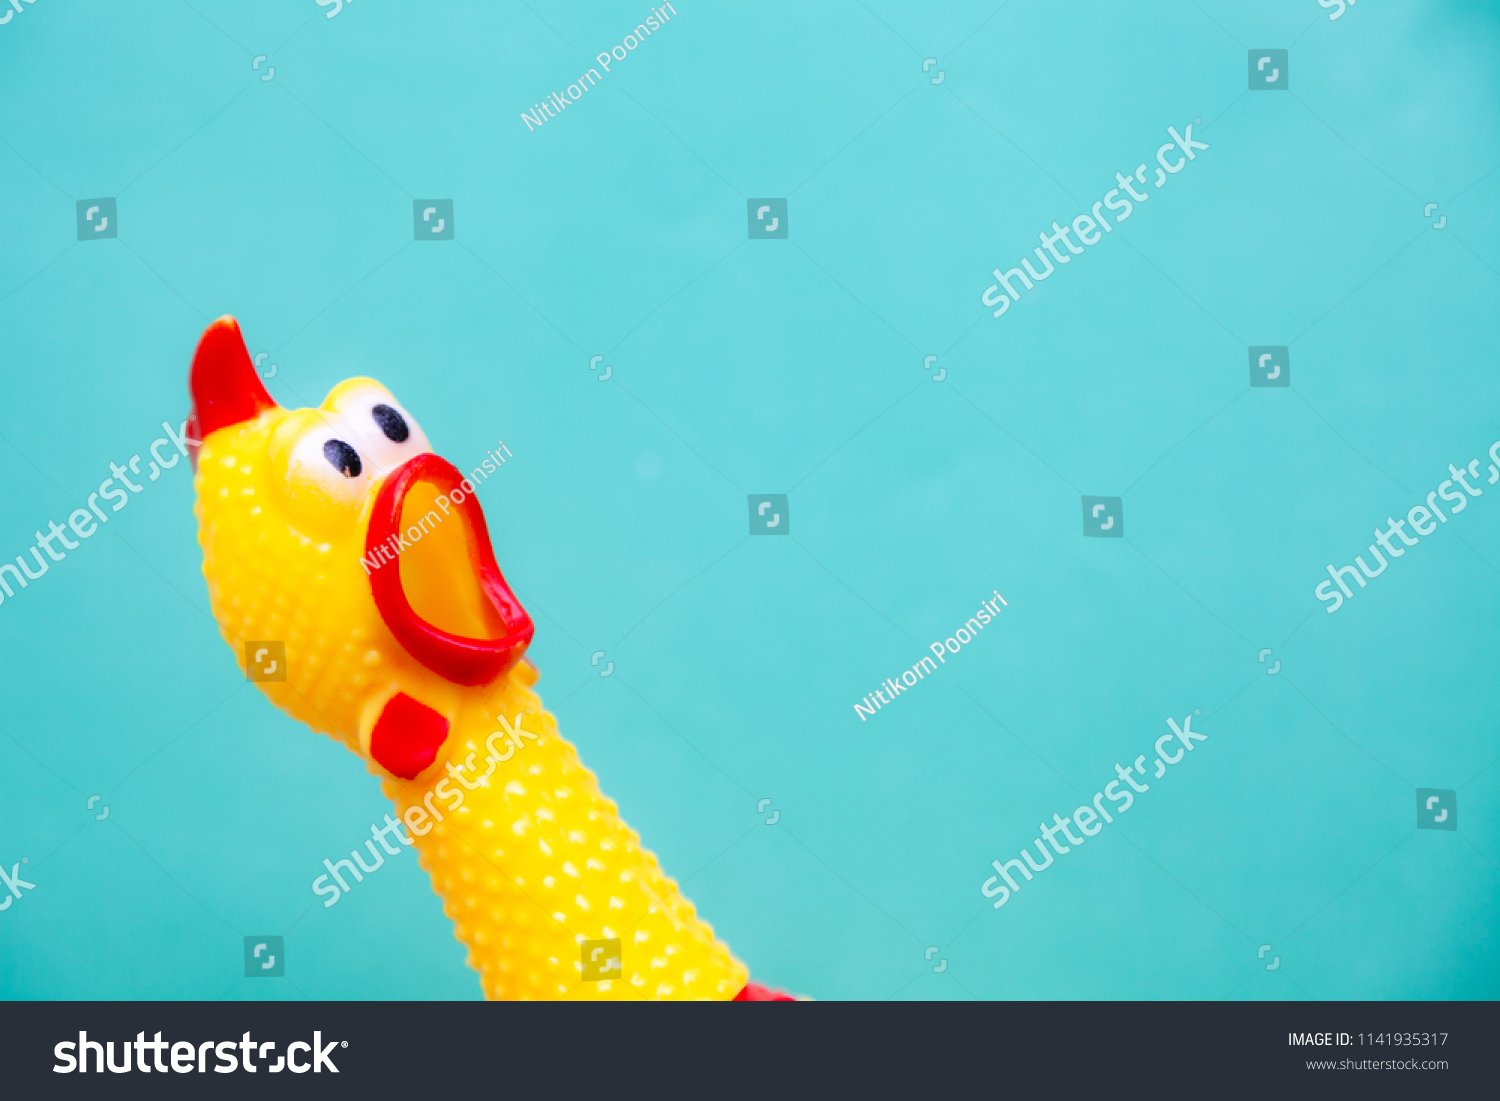 squawking chicken or squeaky toy are shouting and copy space pastel background. #1141935317